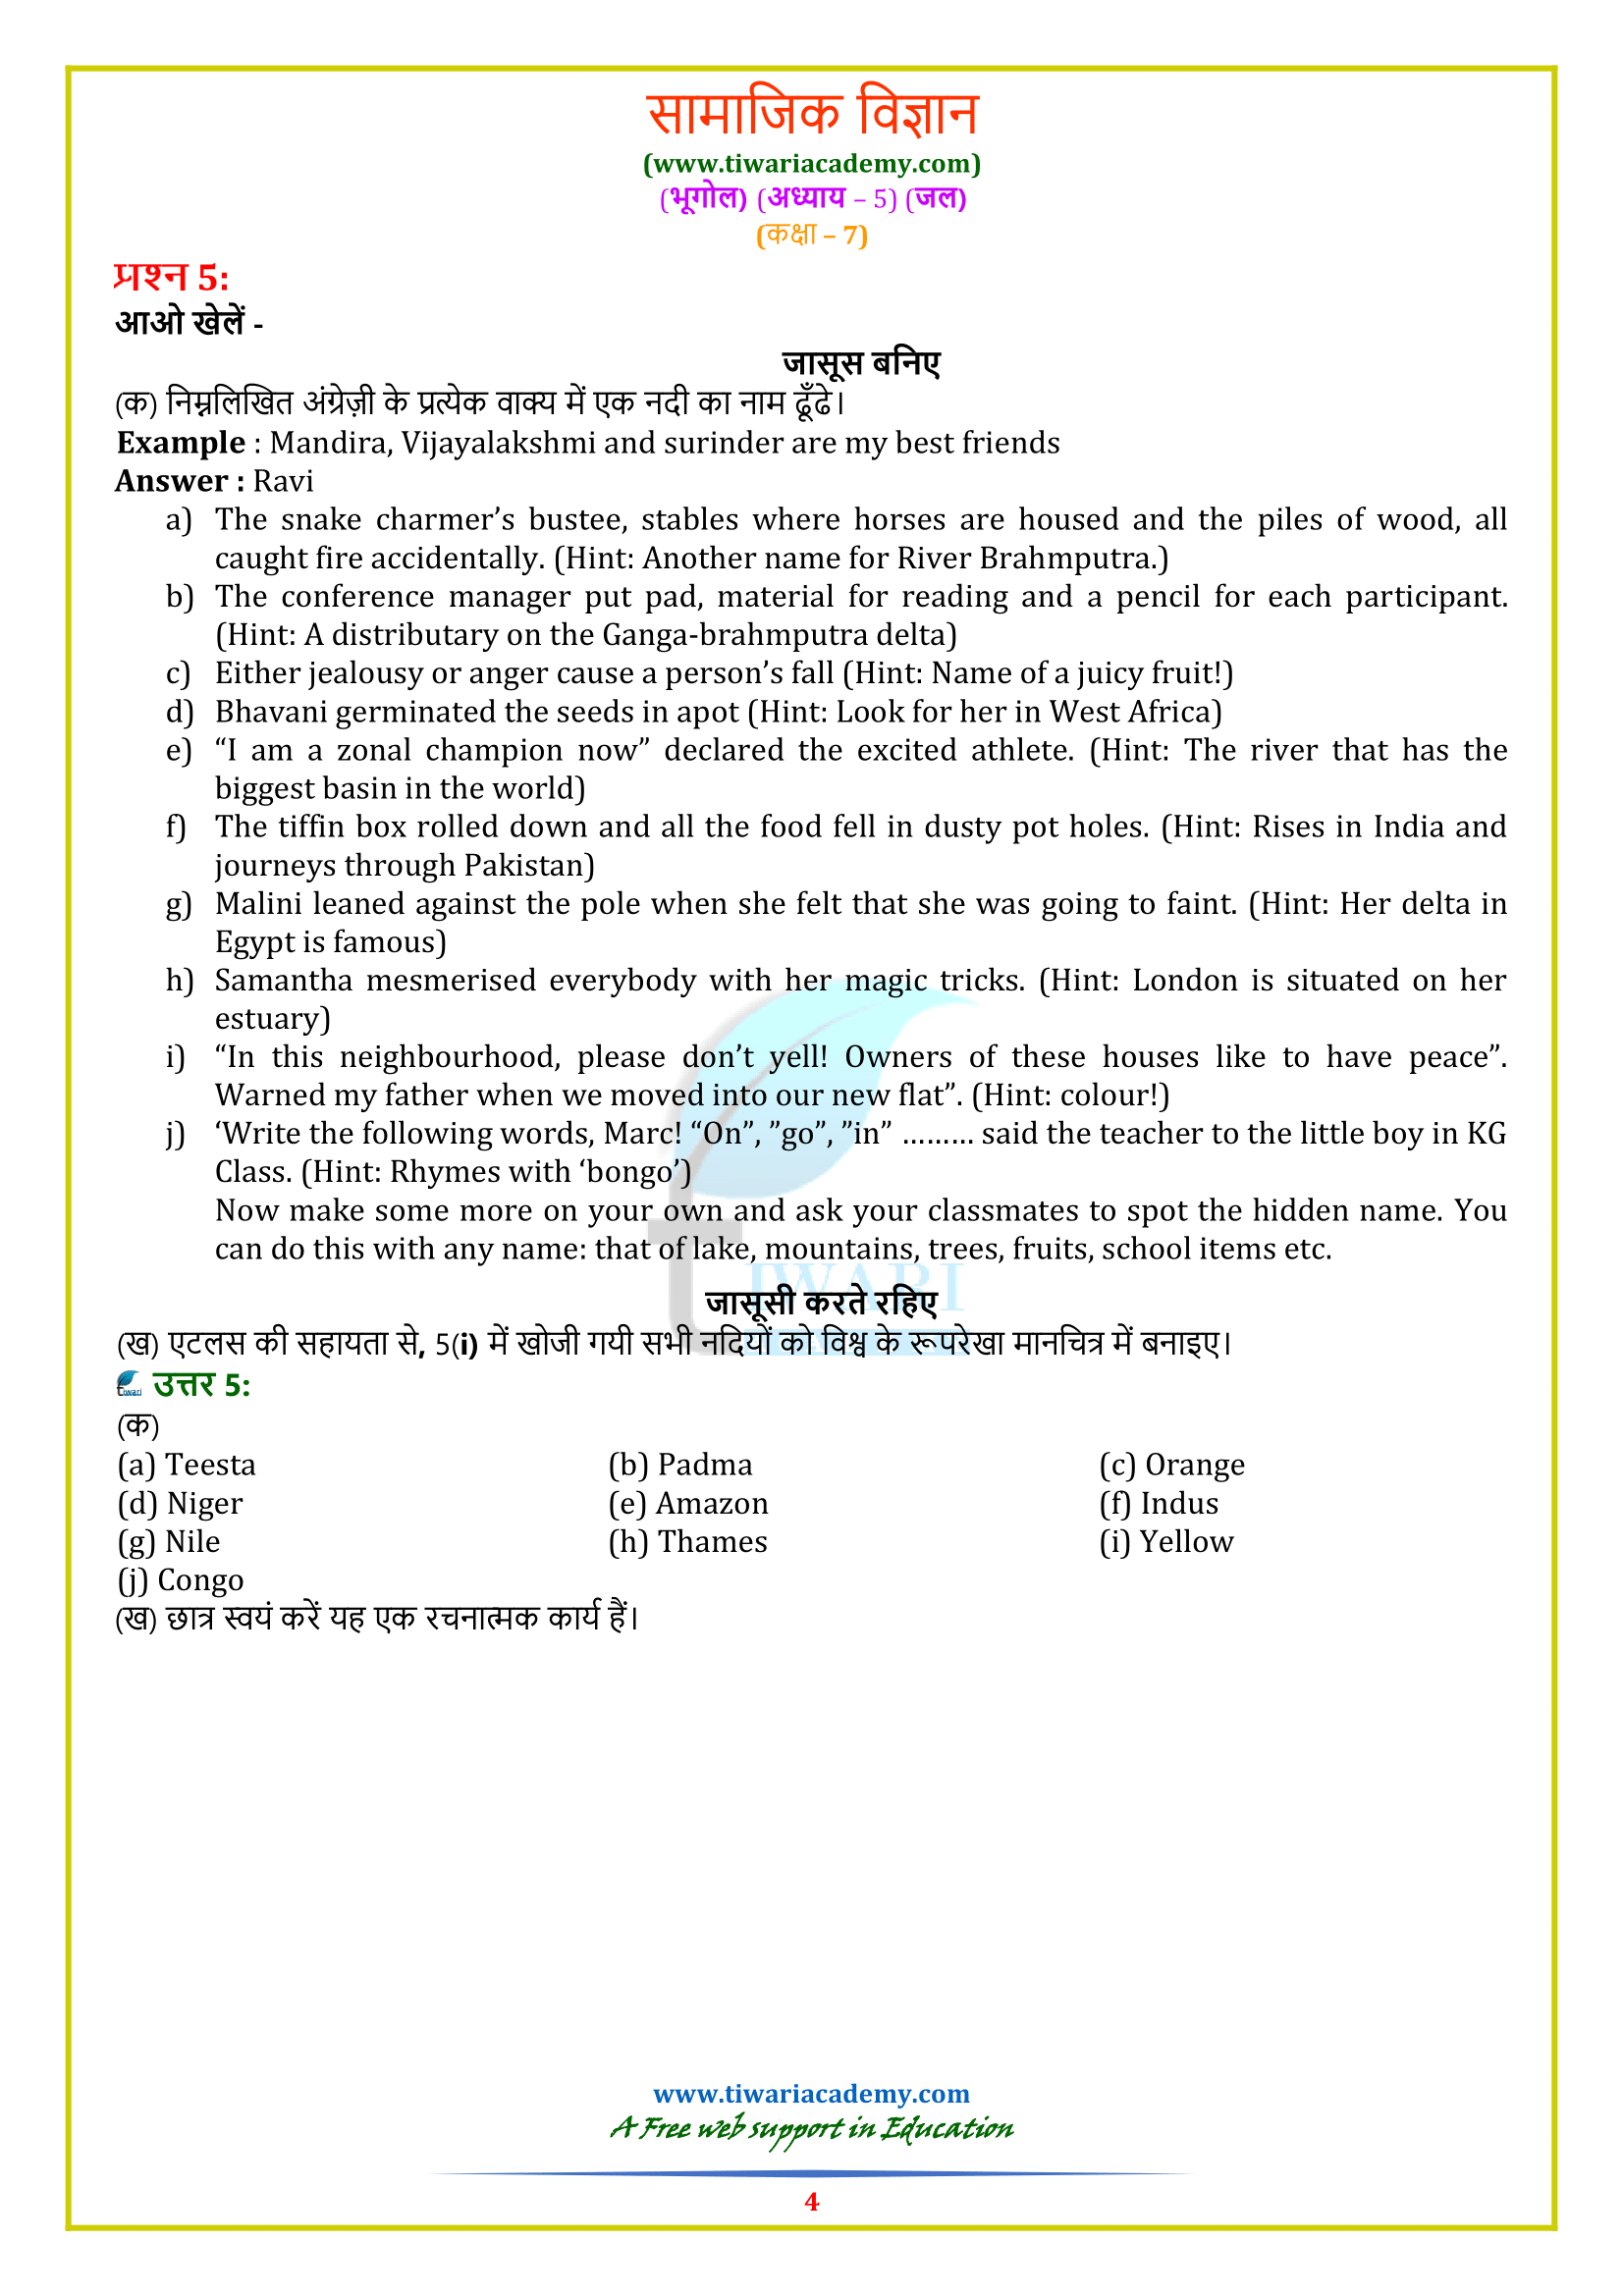 7th Geography ch. 5 answers in Hindi